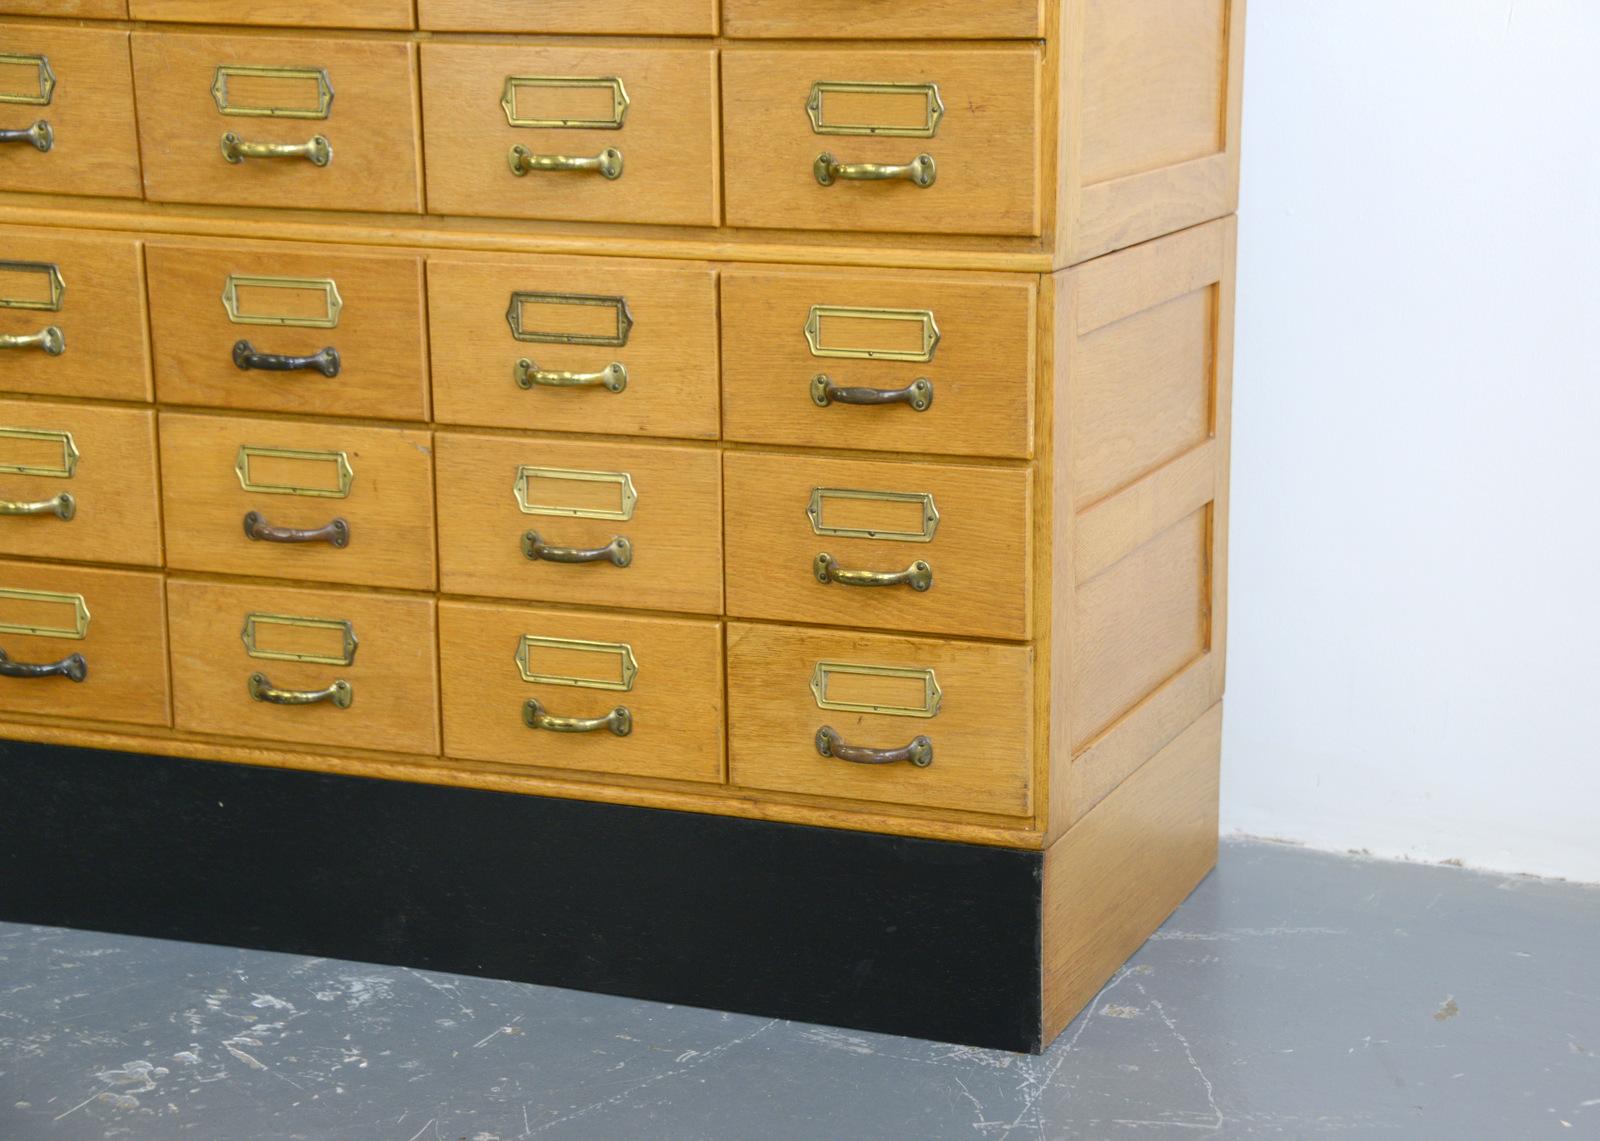 Oak filing drawers, circa 1950s

- Light oak drawers and frame
- Steel handles and card holders
- Ply drawer bottoms
- German, 1950s
- Measures: 94cm wide x 147cm x 42cm 

Condition report

Fully restored with minimal cosmetic wear.